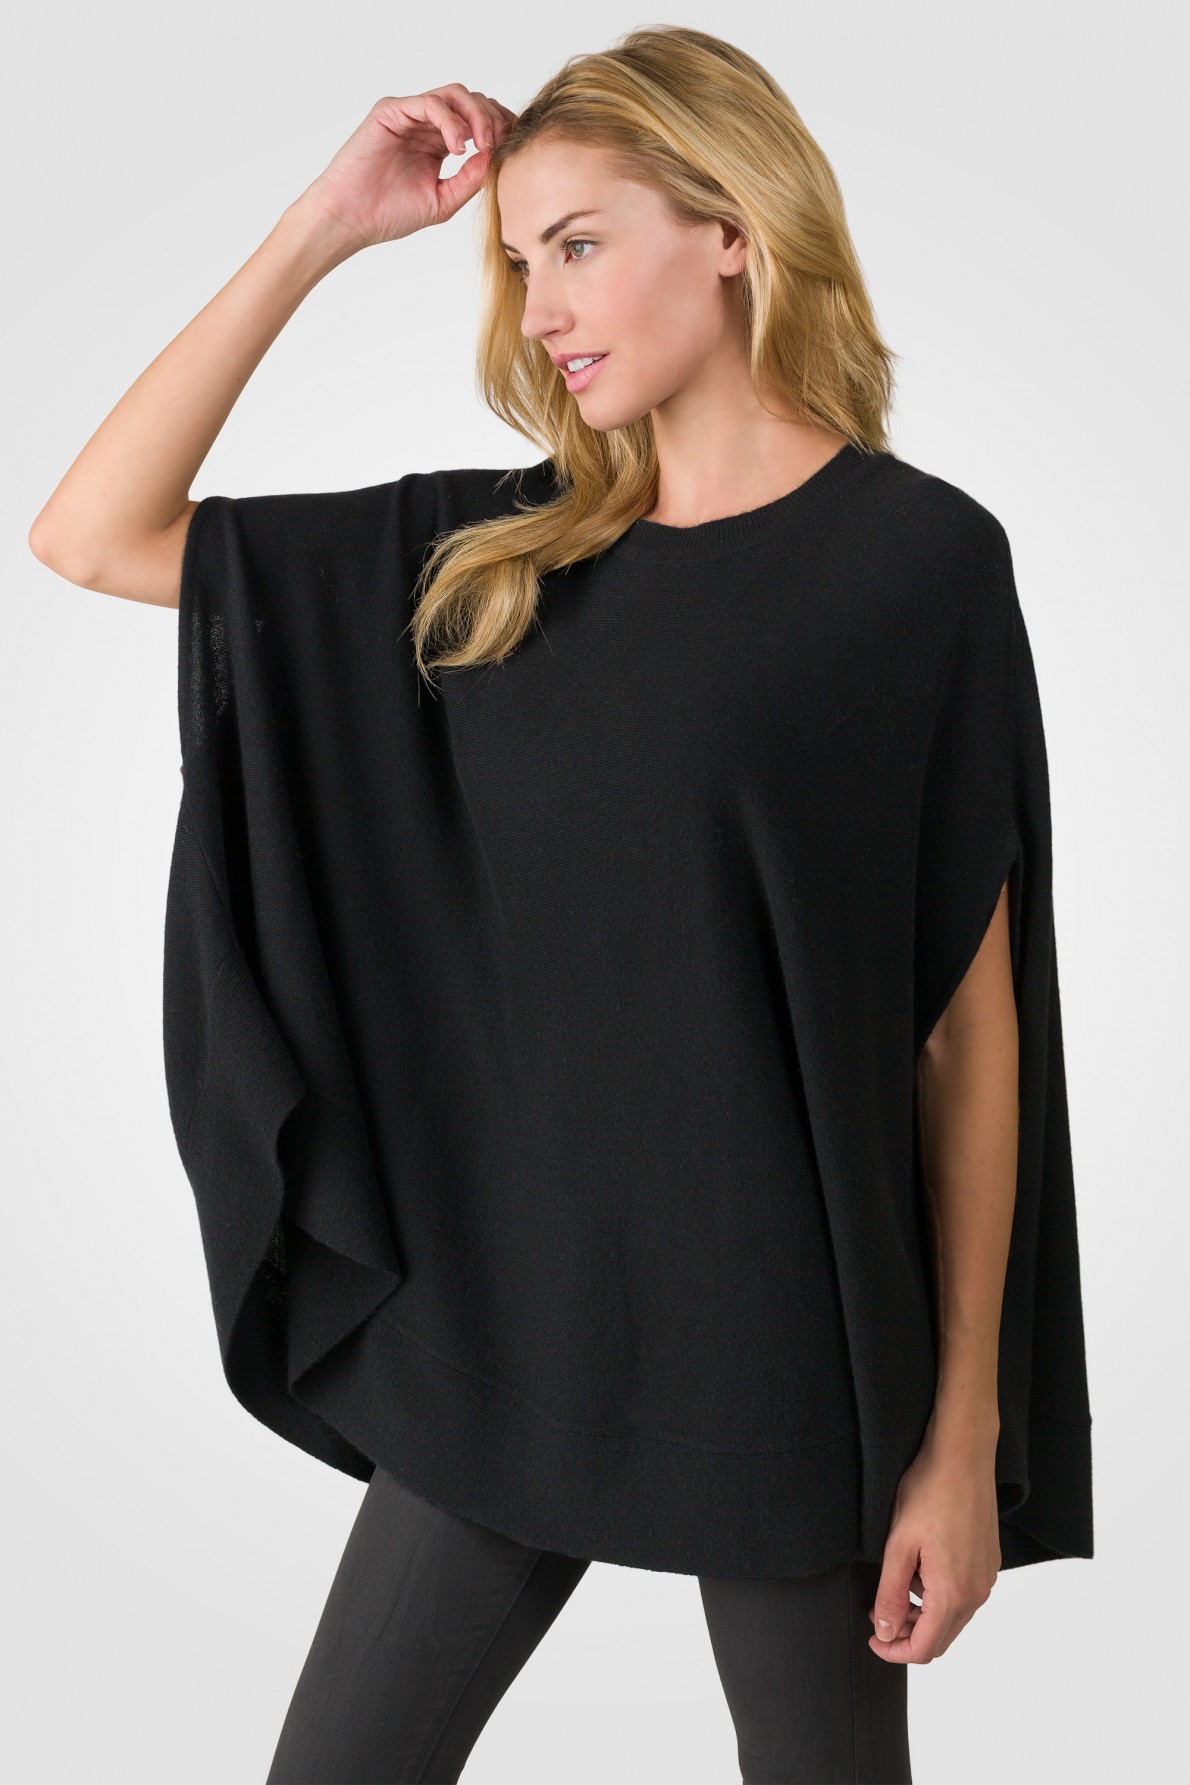 black cashmere oversized laid-back poncho sweater left side view fkphmvg